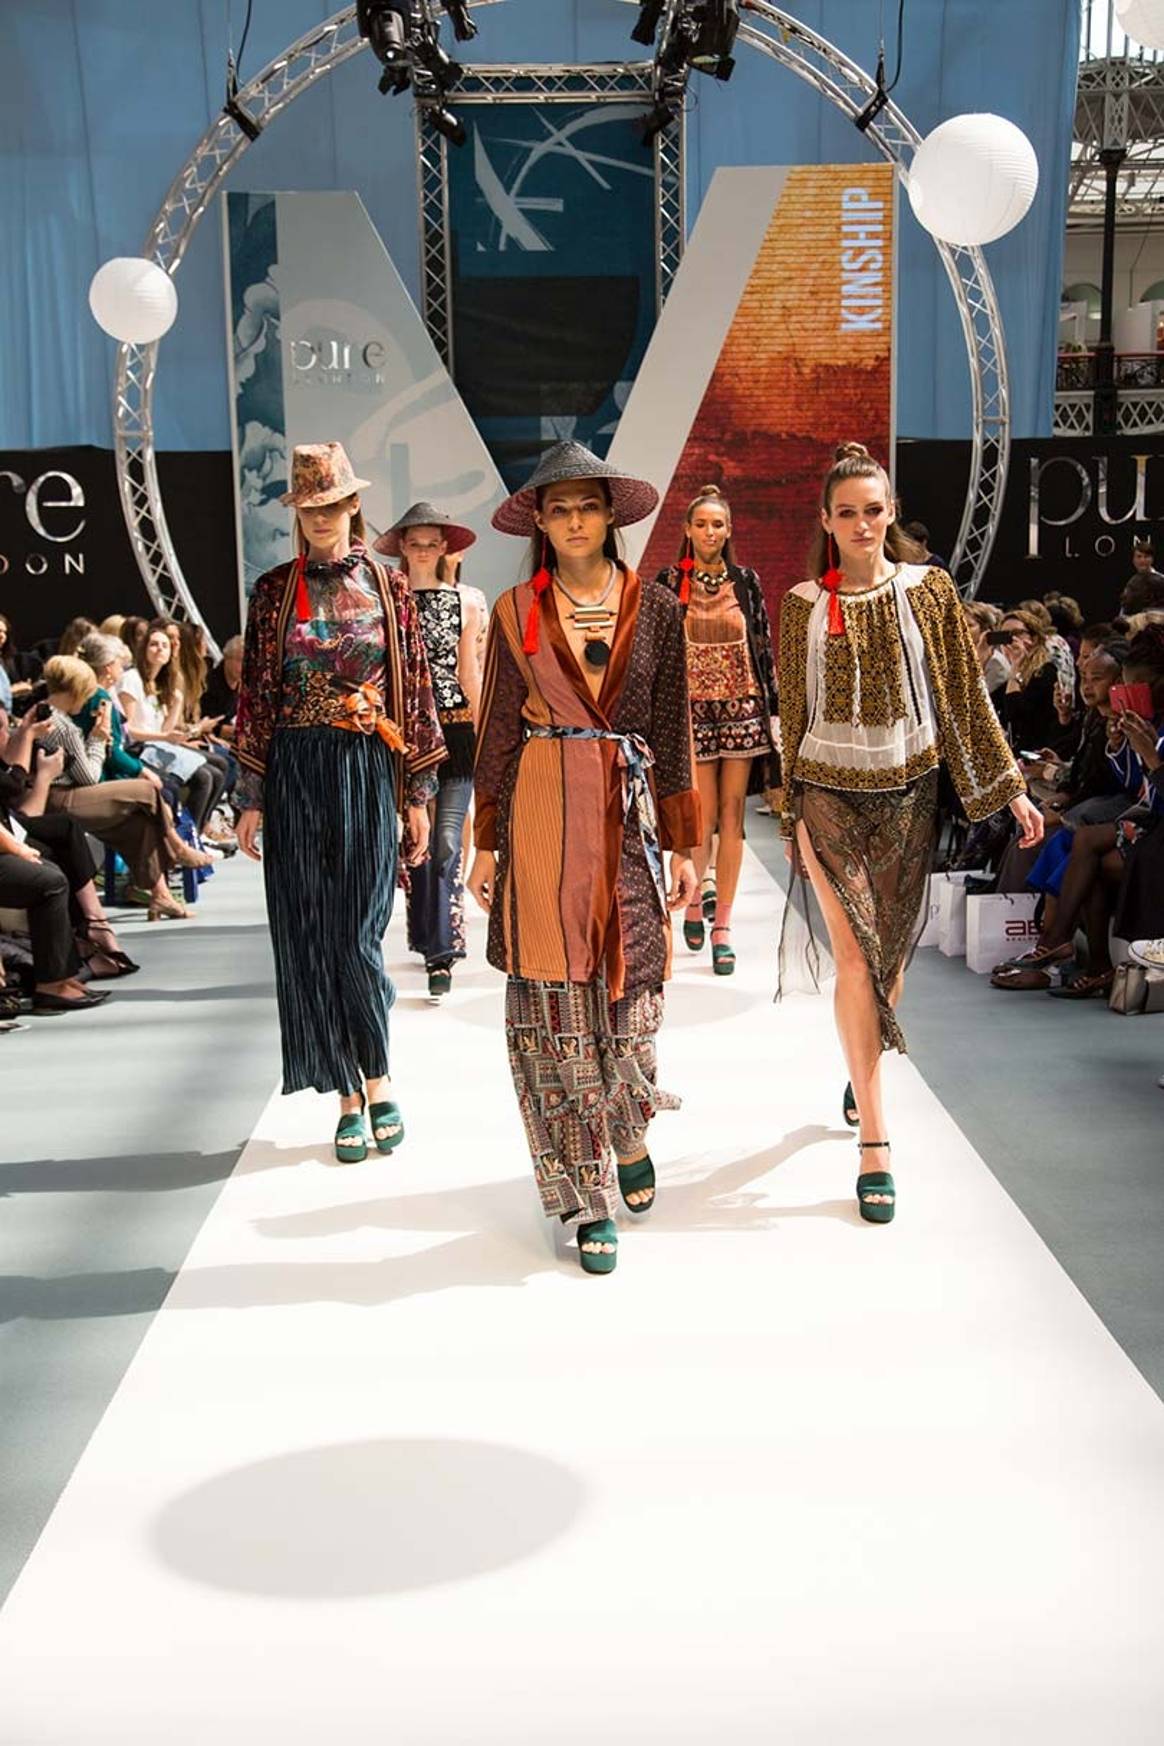 In Pictures: Pure London Spring/Summer 2018